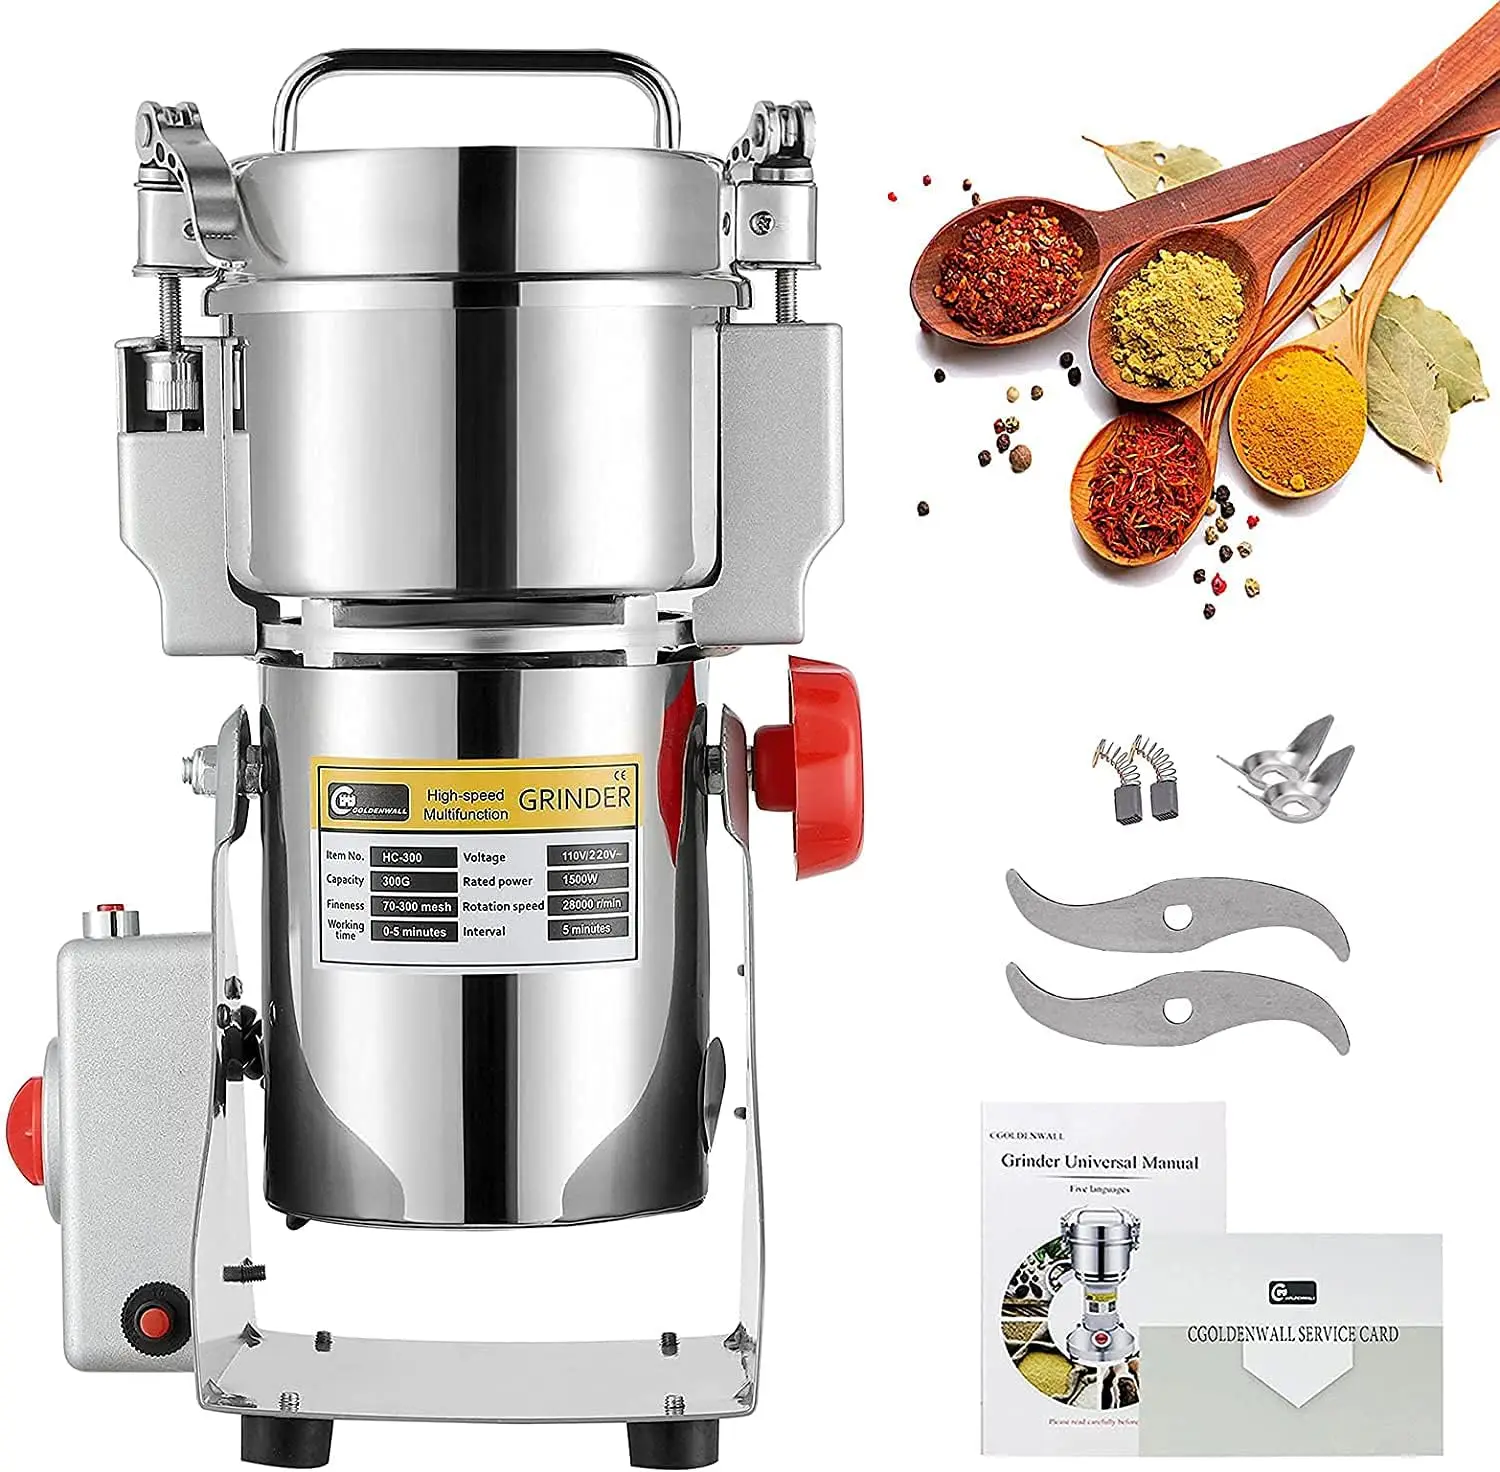 

High-Speed Grain Grinder Mill Stainless Steel for Commercial Spice Grinder Pulverizer for Dried Cereals Grains Spices Herbs 110